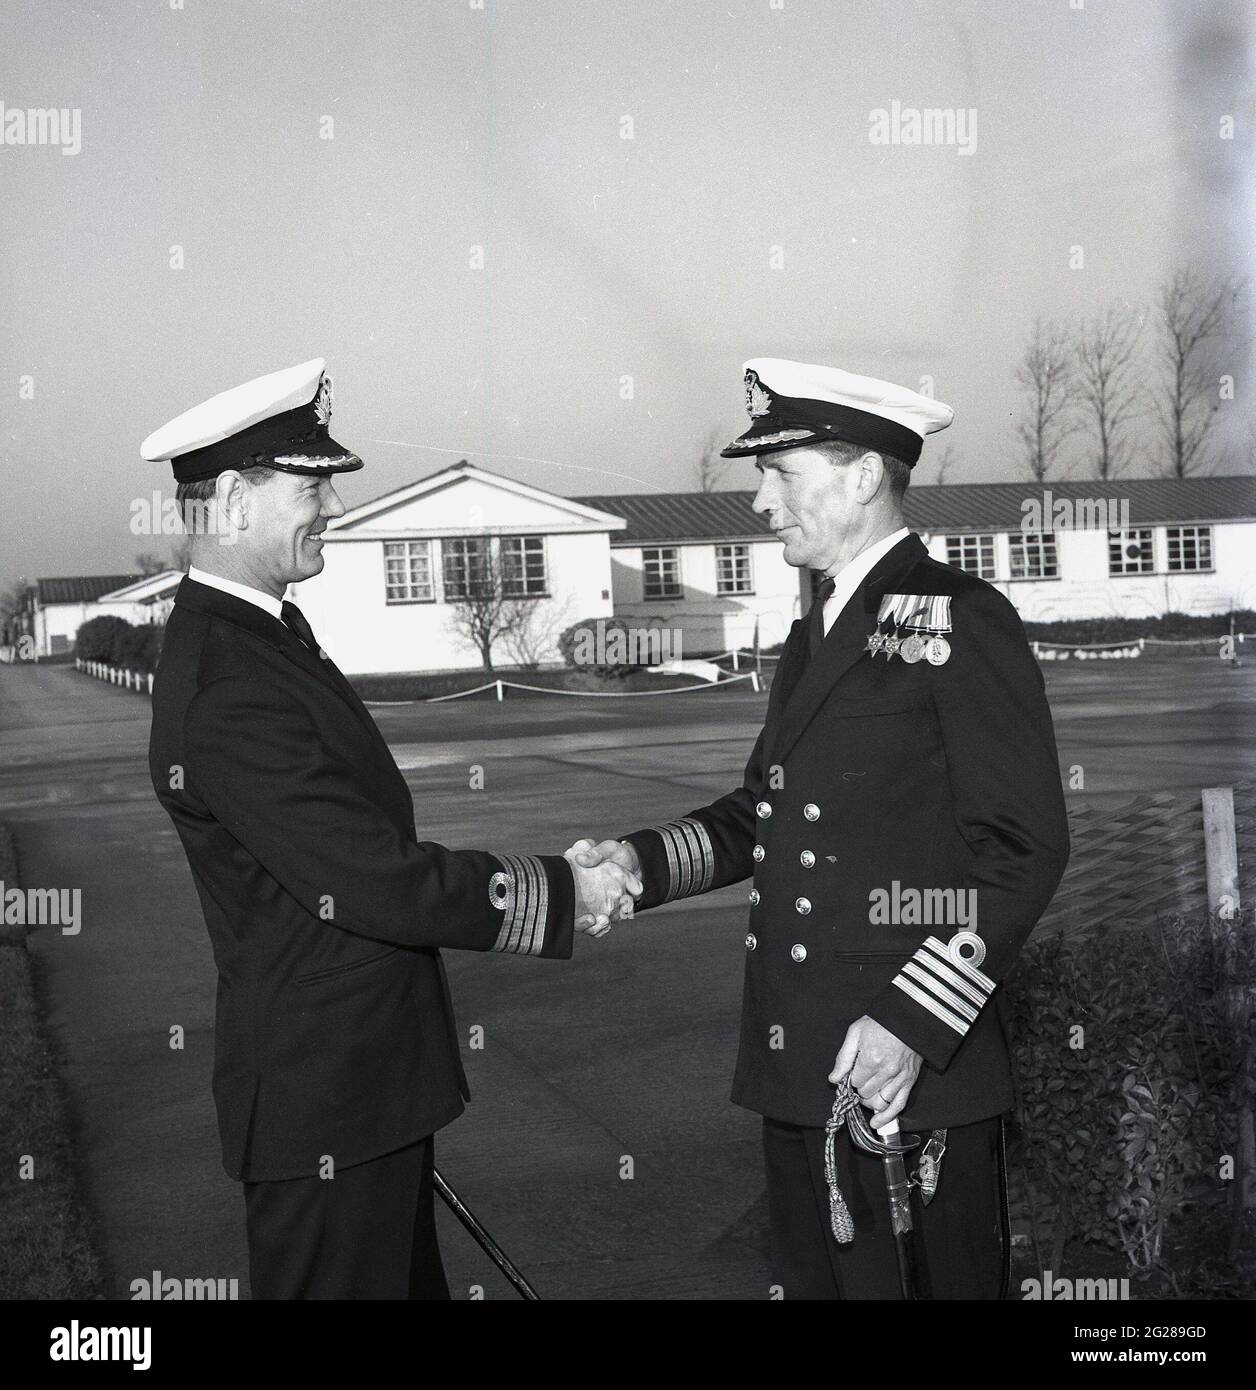 1960s, historical, outside at HMS Calendonia, two Royal Naval  Captains shaking hands, in a hand-over of command, Fife, Scotland. Captain (Capt) is a senior officer rank of the Royal Navy, above a Commander and below Commodore and has a NATO ranking code of OF-5. The rank is equivalent to a Colonel in the British Army and Royal Marines, and to a Group Captain in the Royal Air Force. HMS Caledonia was first opened in 1937 and was responsible for artificer apprentice training up to 1985, with many thousands of young men going through training. Stock Photo